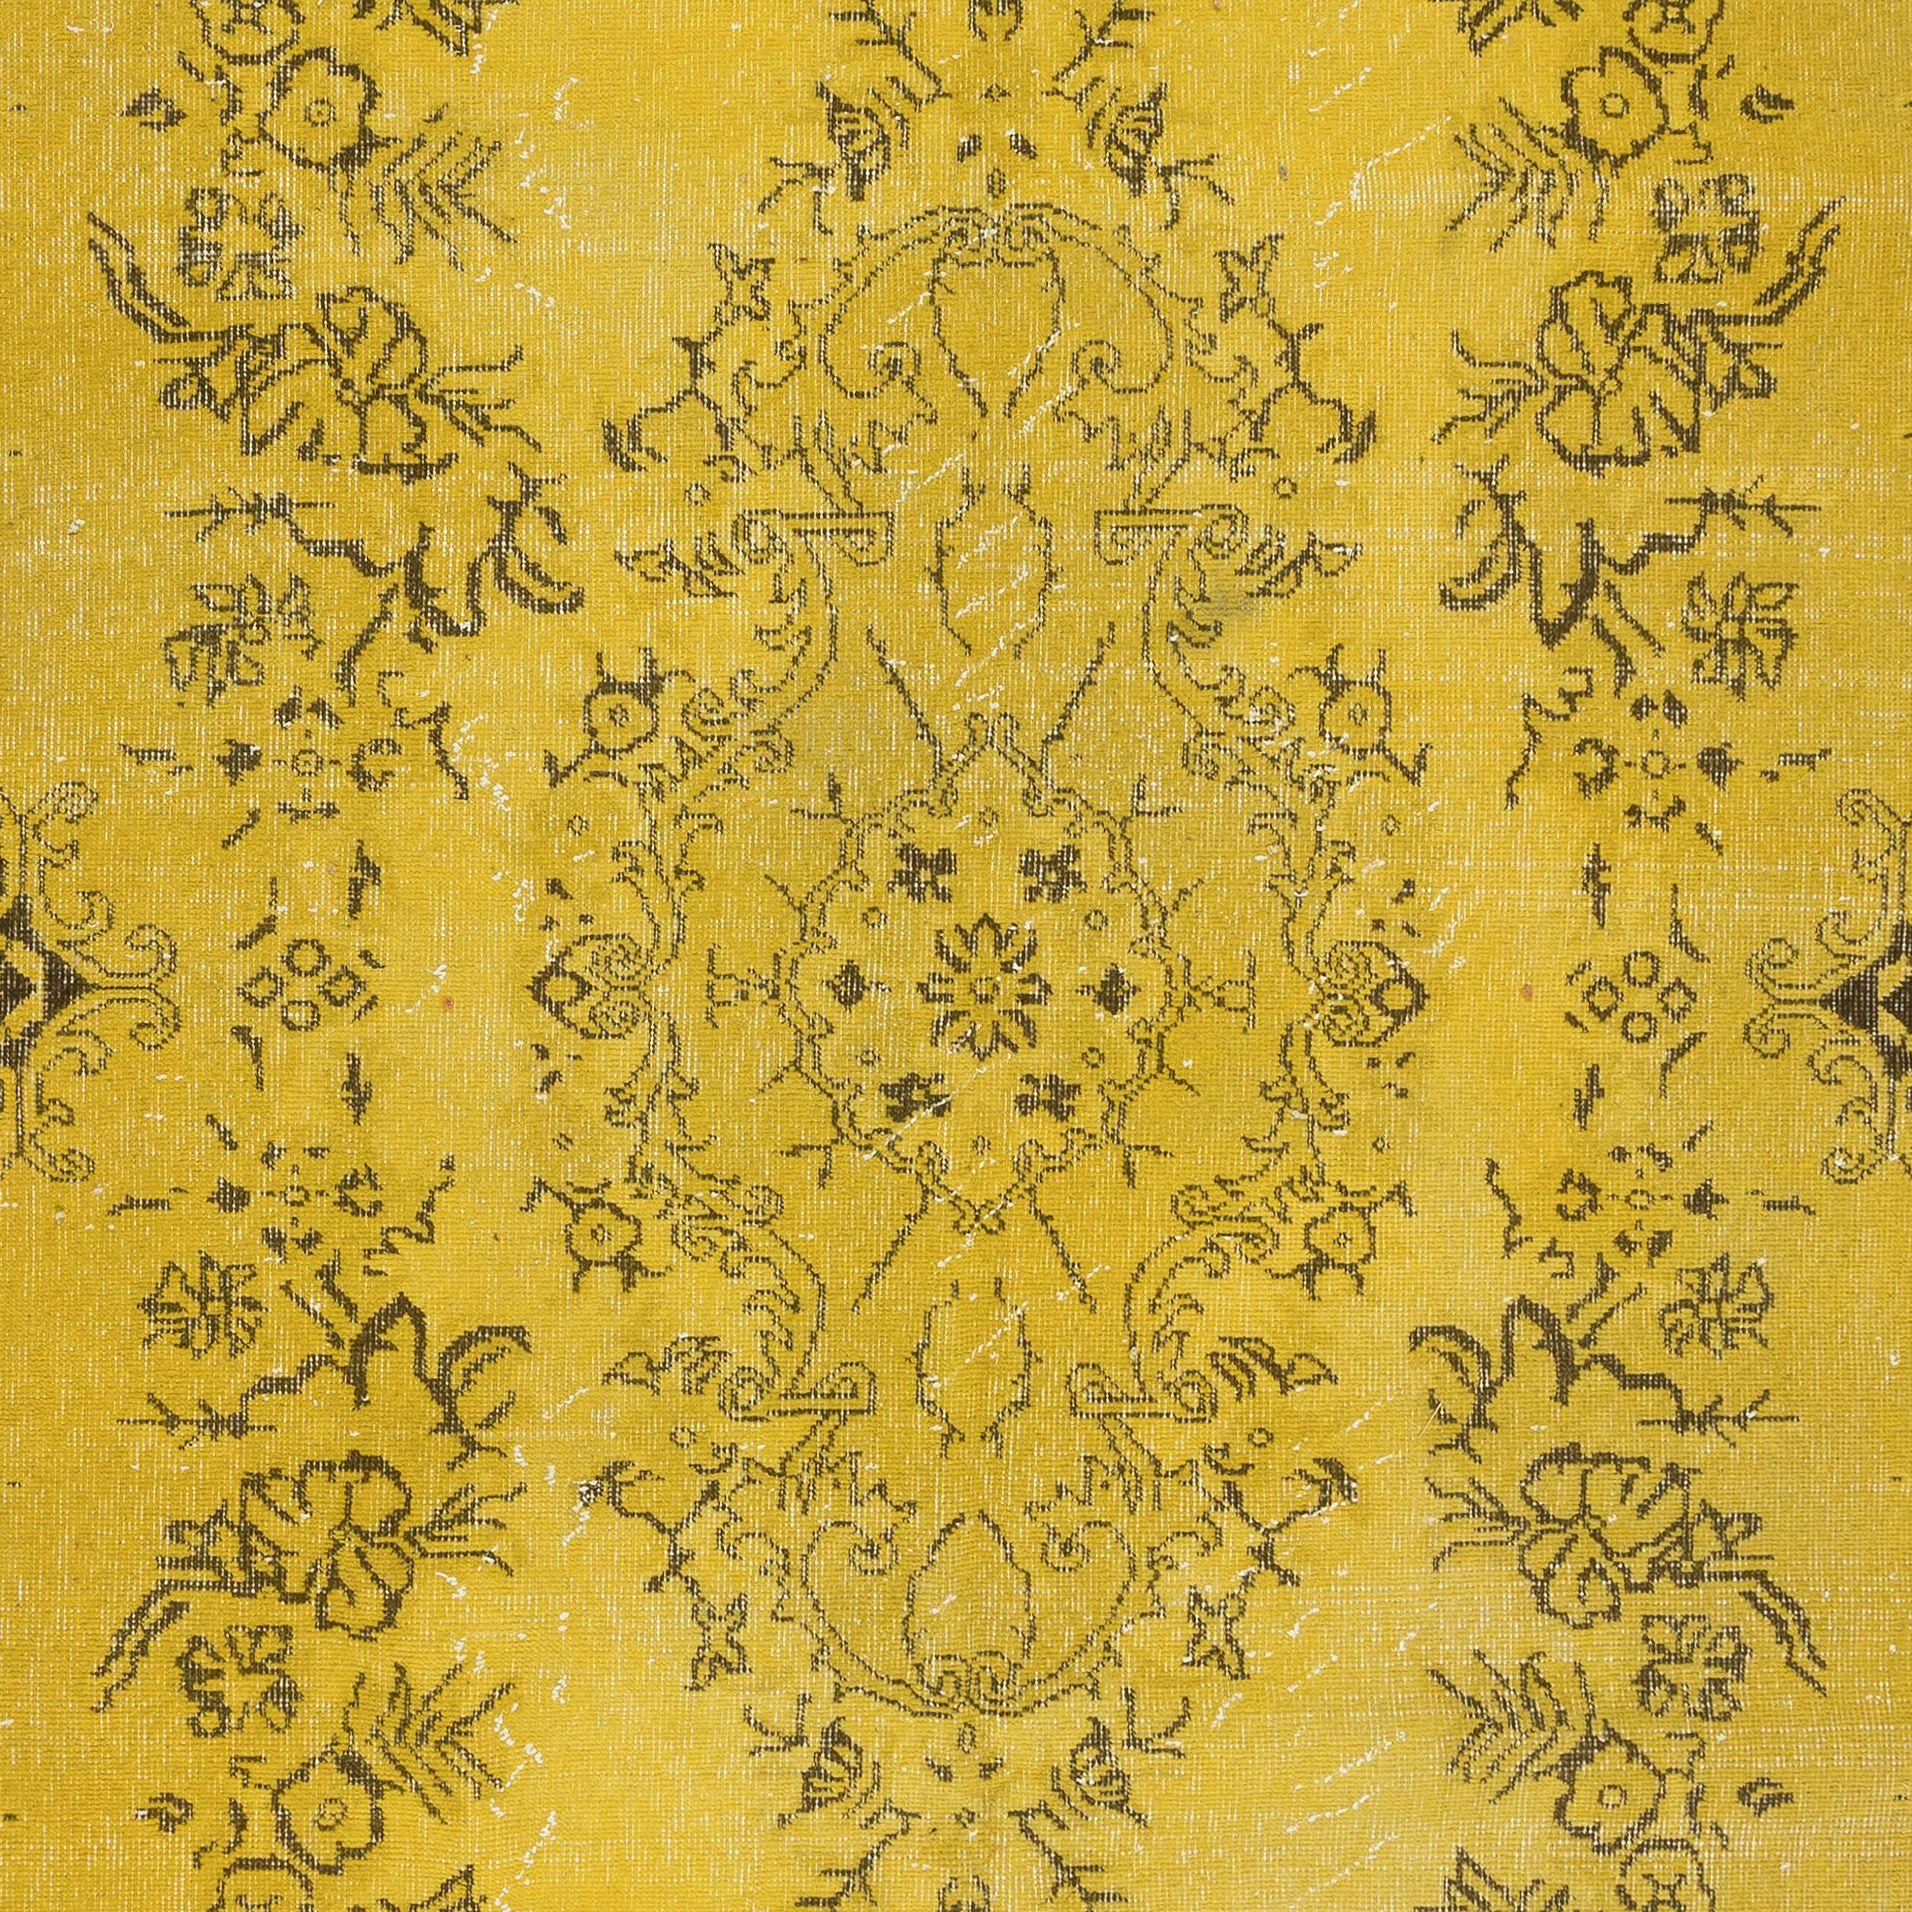 Modern 5.5x9.5 Ft Decorative Yellow Handmade Room Size Rug, Upcycled Turkish Carpet For Sale